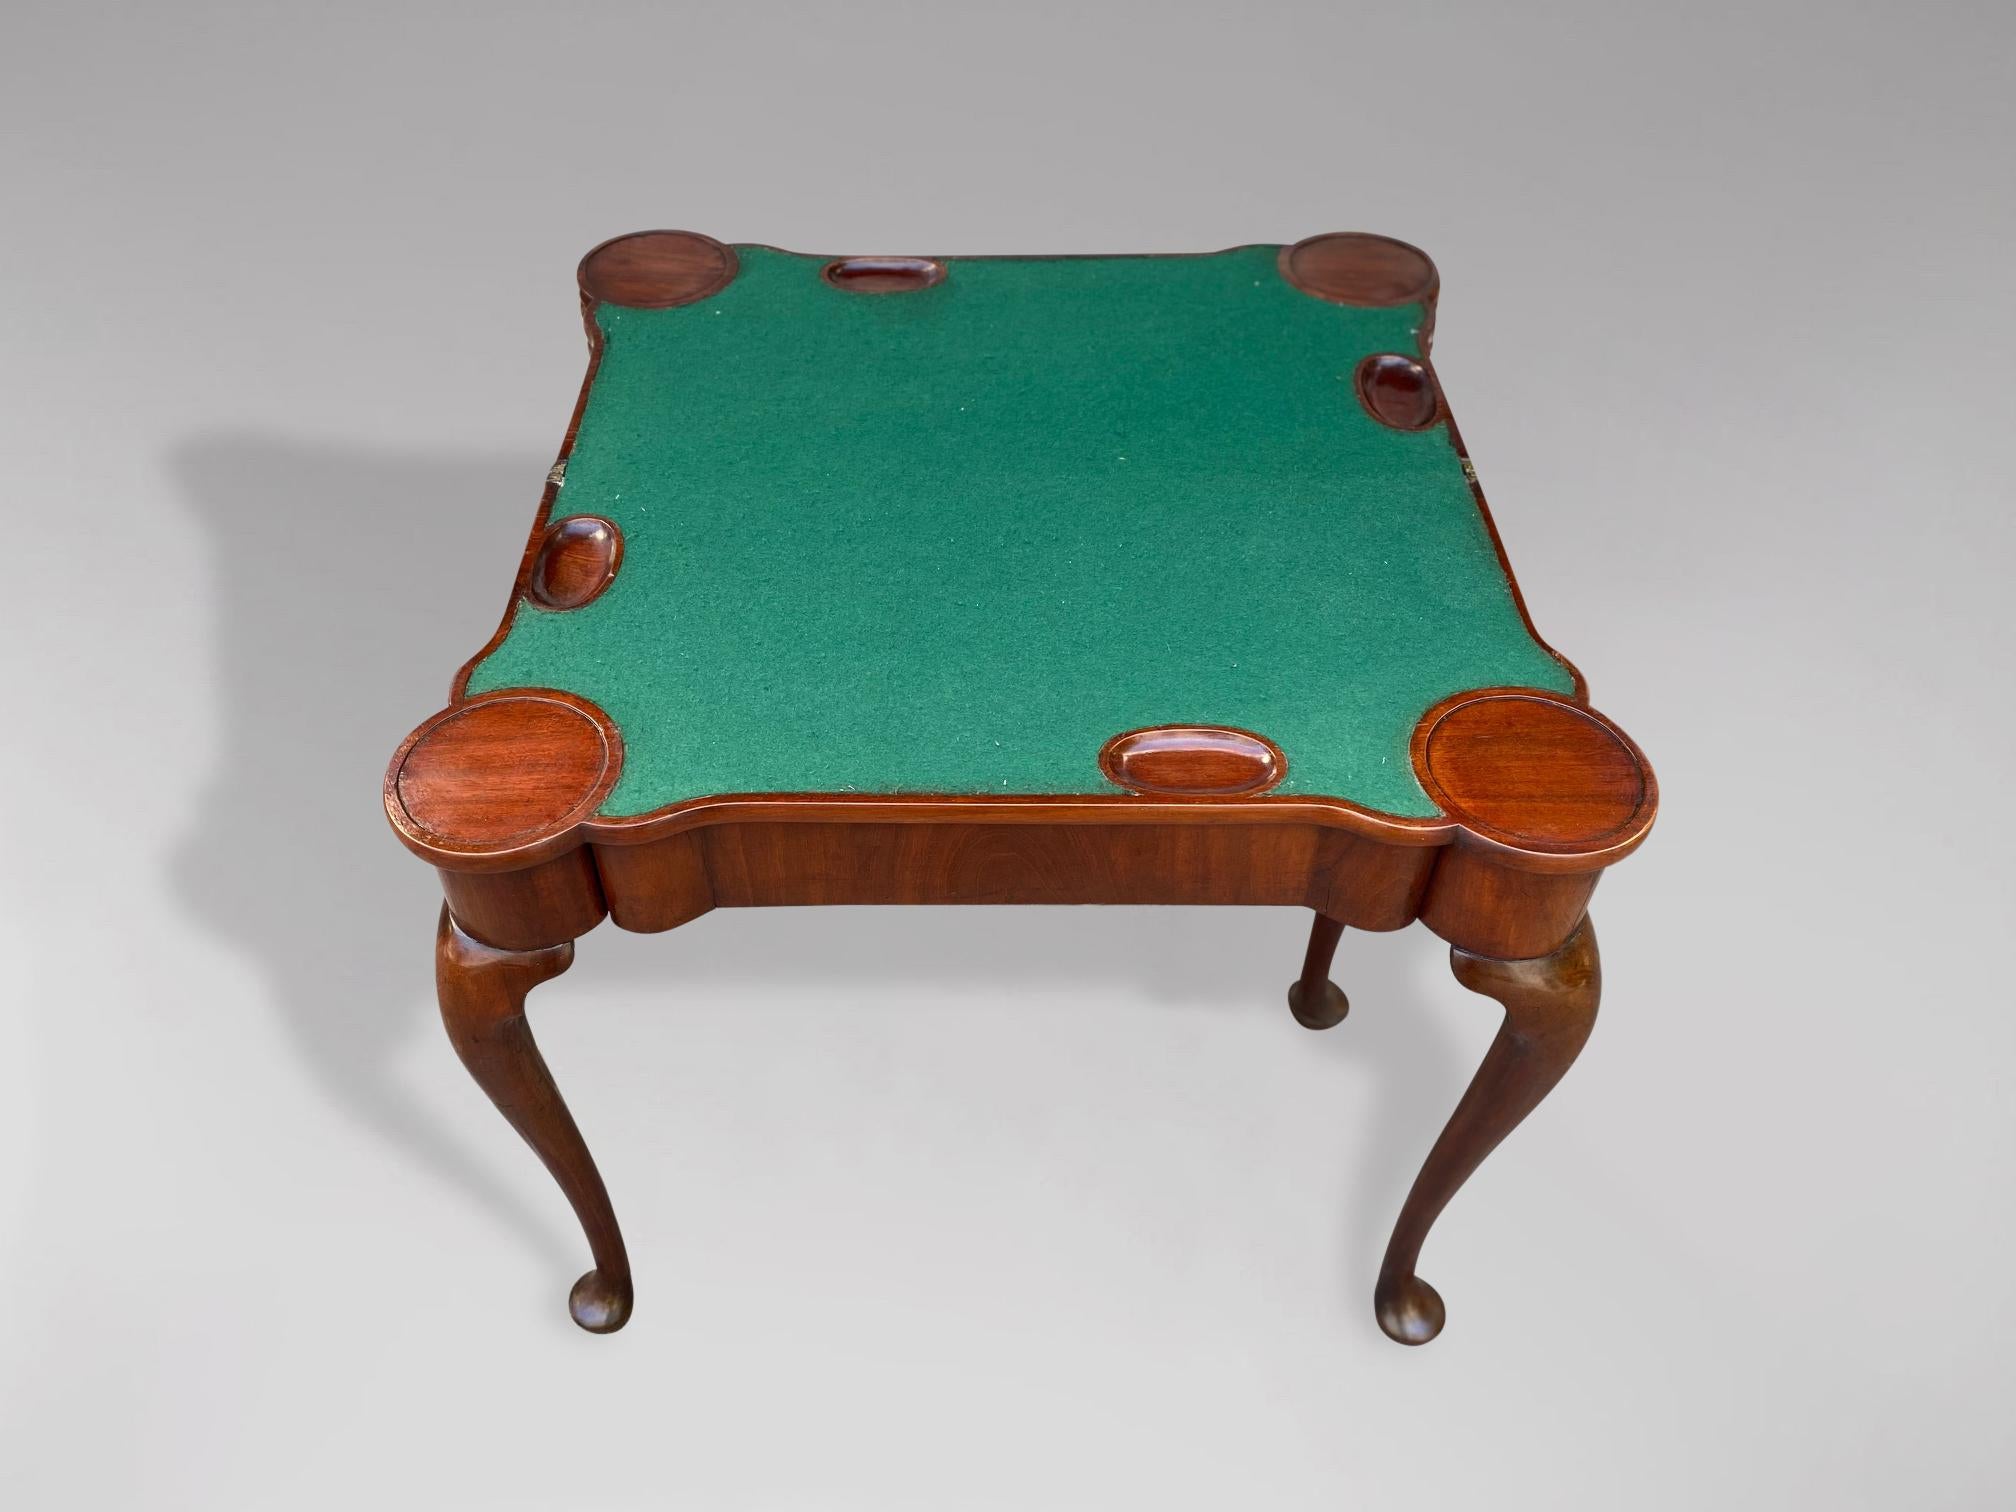 Very Fine Mid 18th Century George II Period Mahogany Triple Top Card Table 4